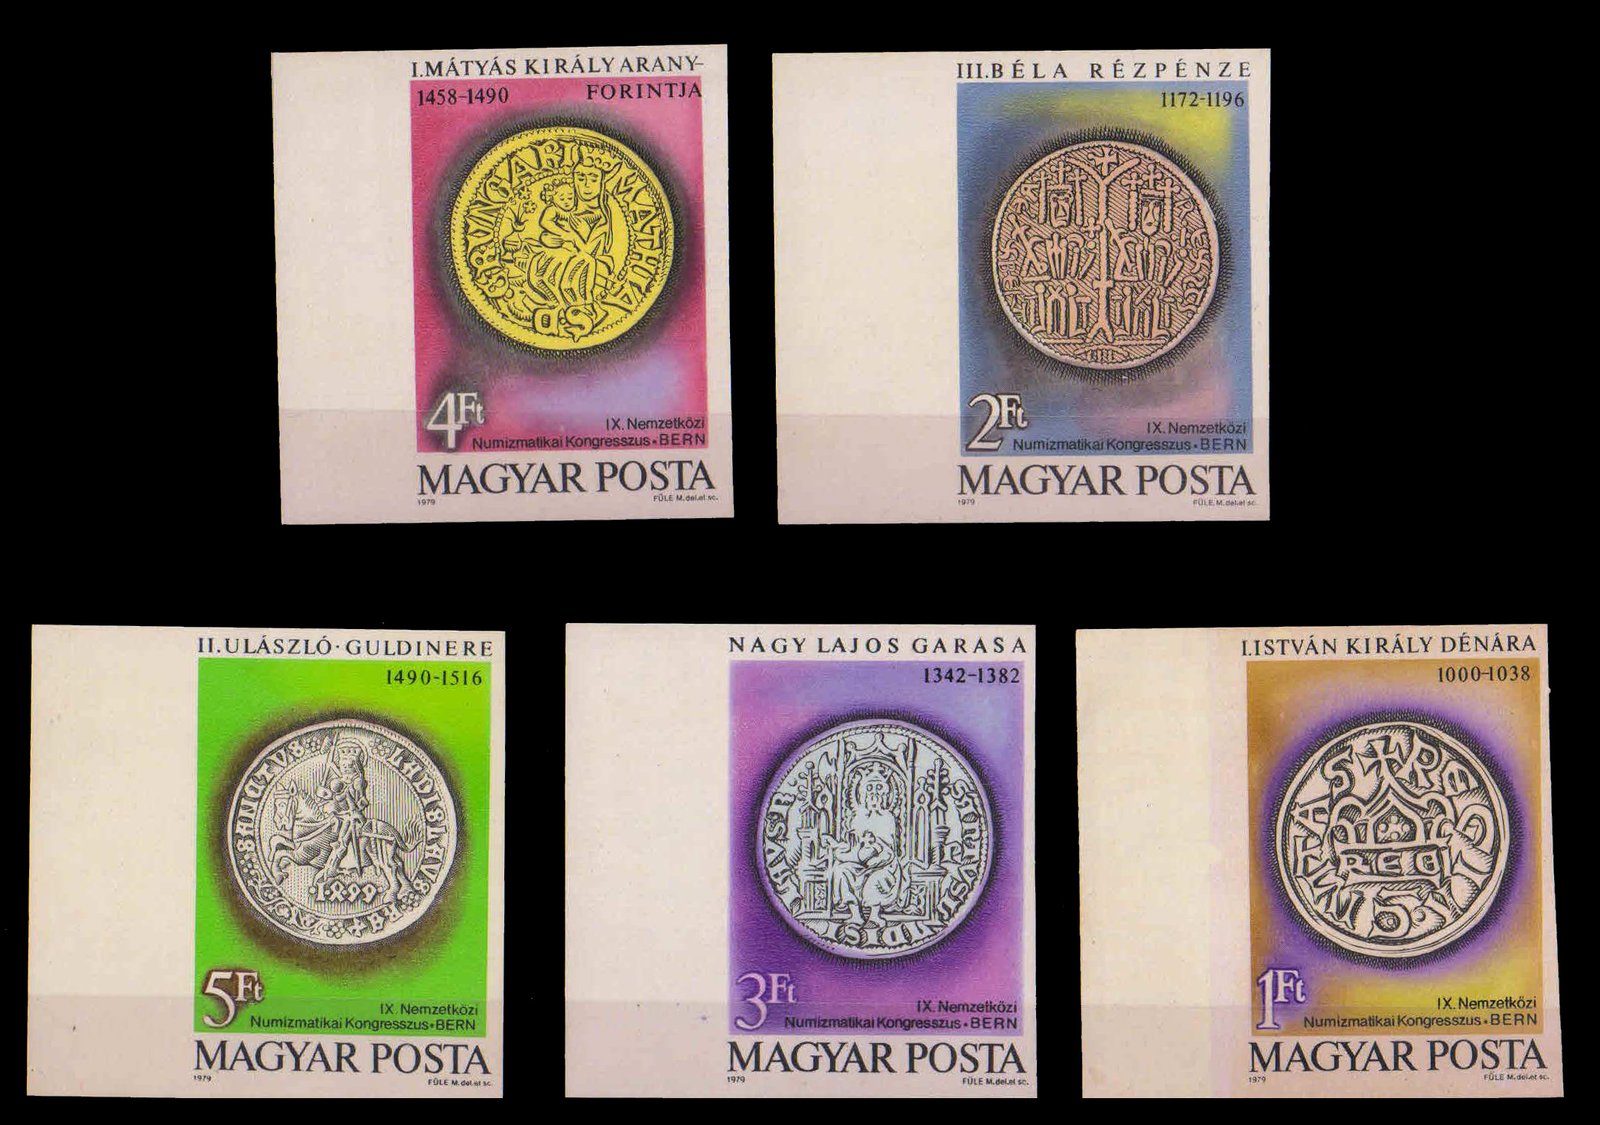 HUNGARY 1979, 9th International Numismatic Congress, Old Hungarian Coins, Set of 5 Imperf Stamps, MNH, S.G. 3265-3269